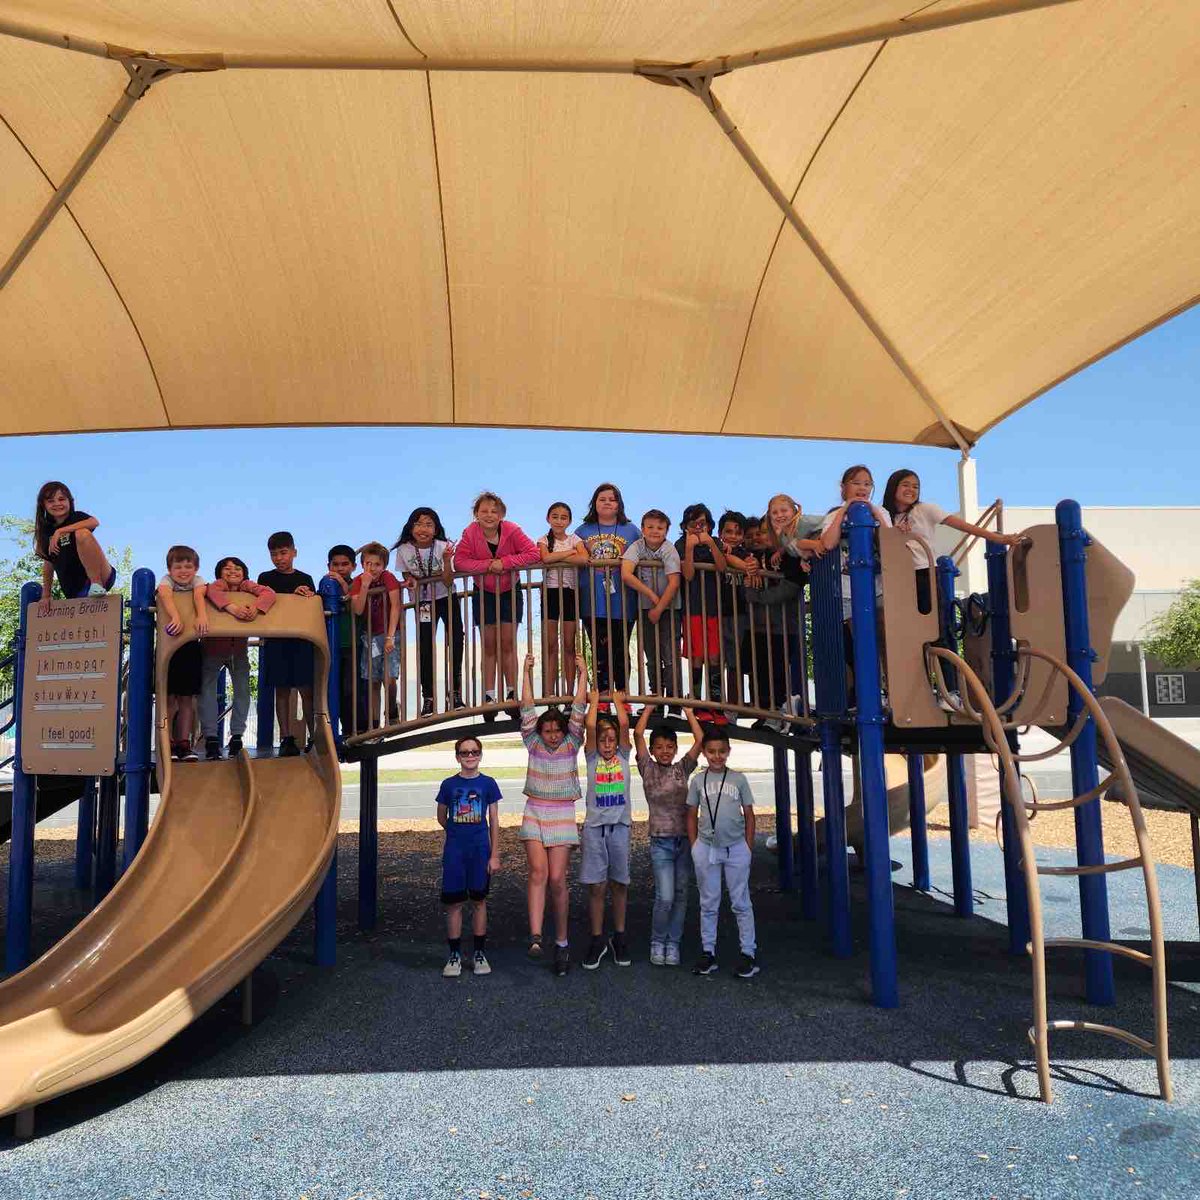 For the second time this year, Ms. Mendoza’s class has spelled out “here and on time” by having perfect classroom attendance! They earned extra recess! #attendancematters